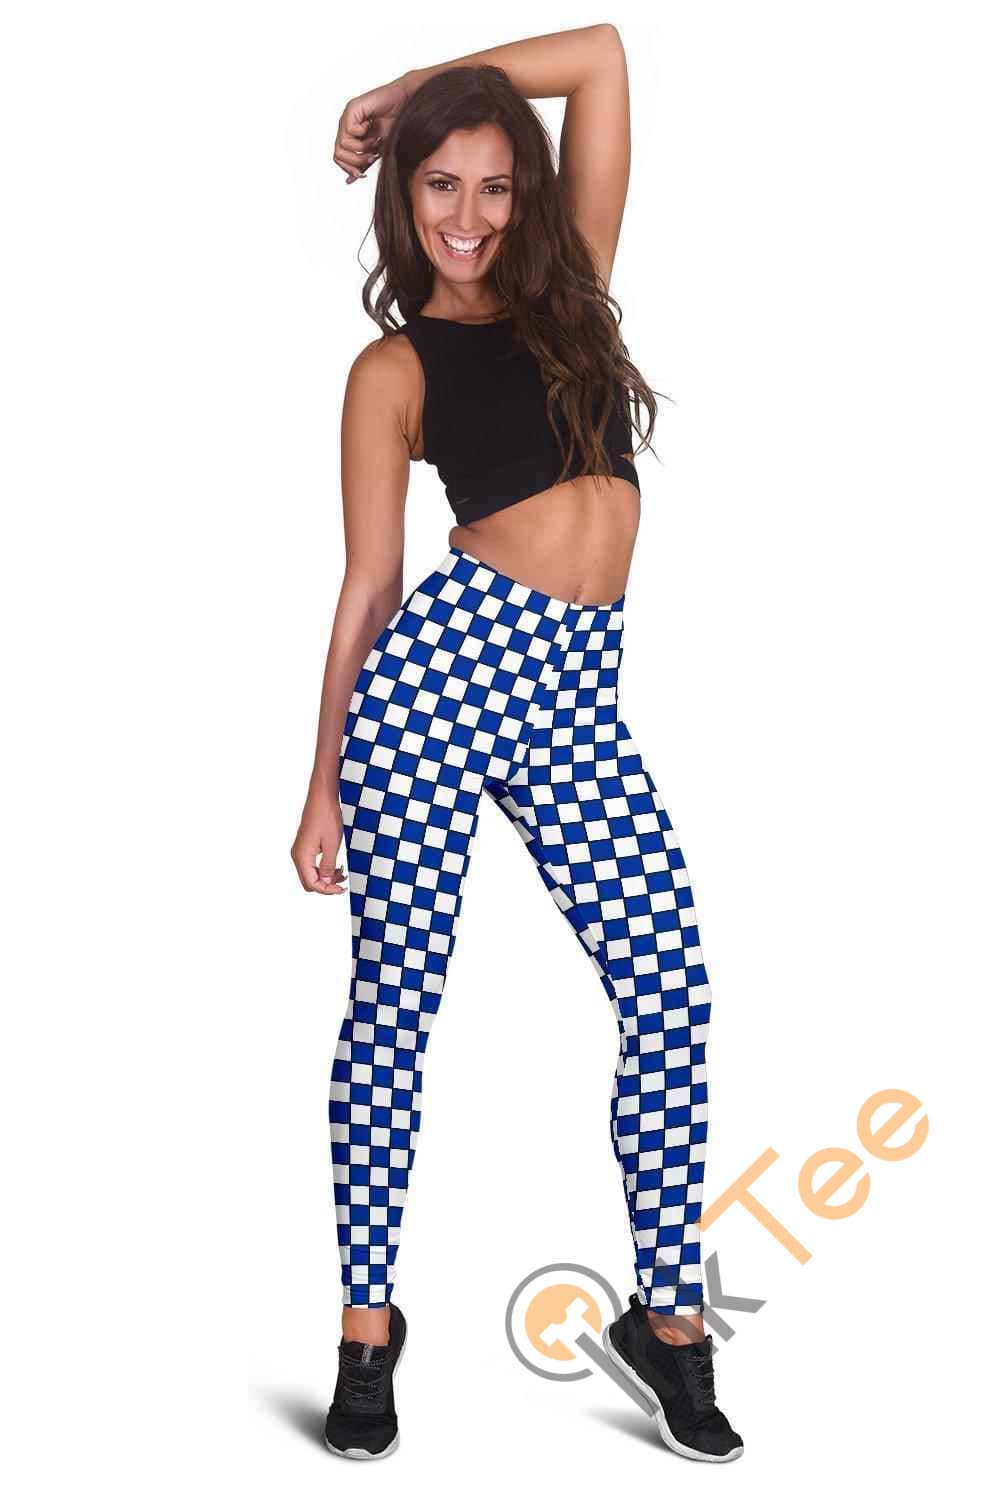 Inktee Store - Kentucky Wildcats Fan Inspired 3D All Over Print For Yoga Fitness Checkers Women'S Leggings Image